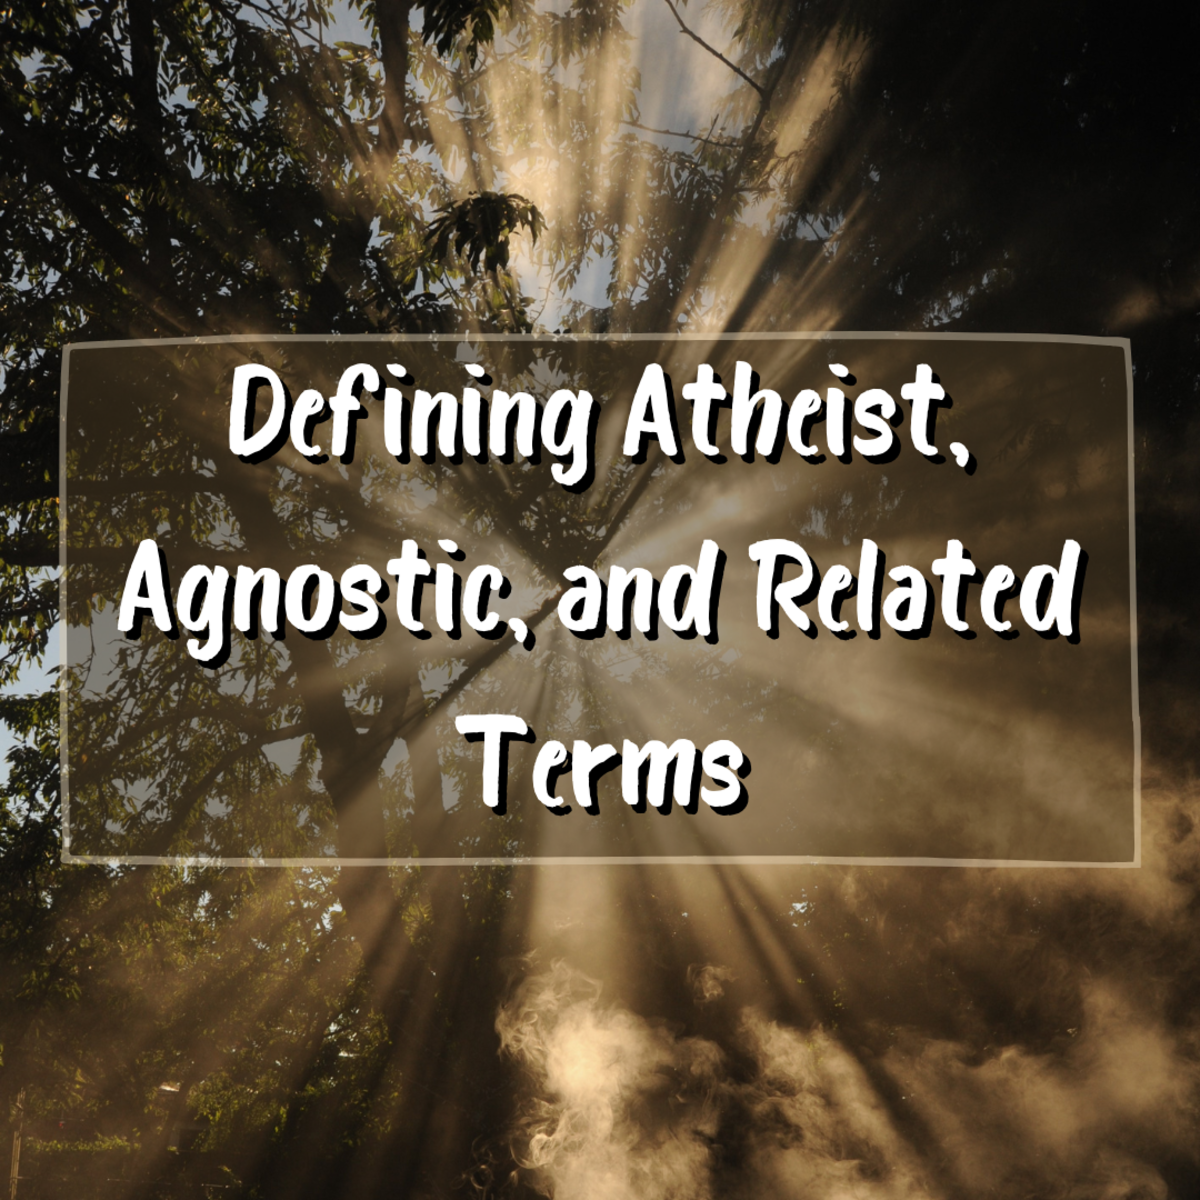 How do we define agnostic? Atheist? Read on to learn more about these and related terms.